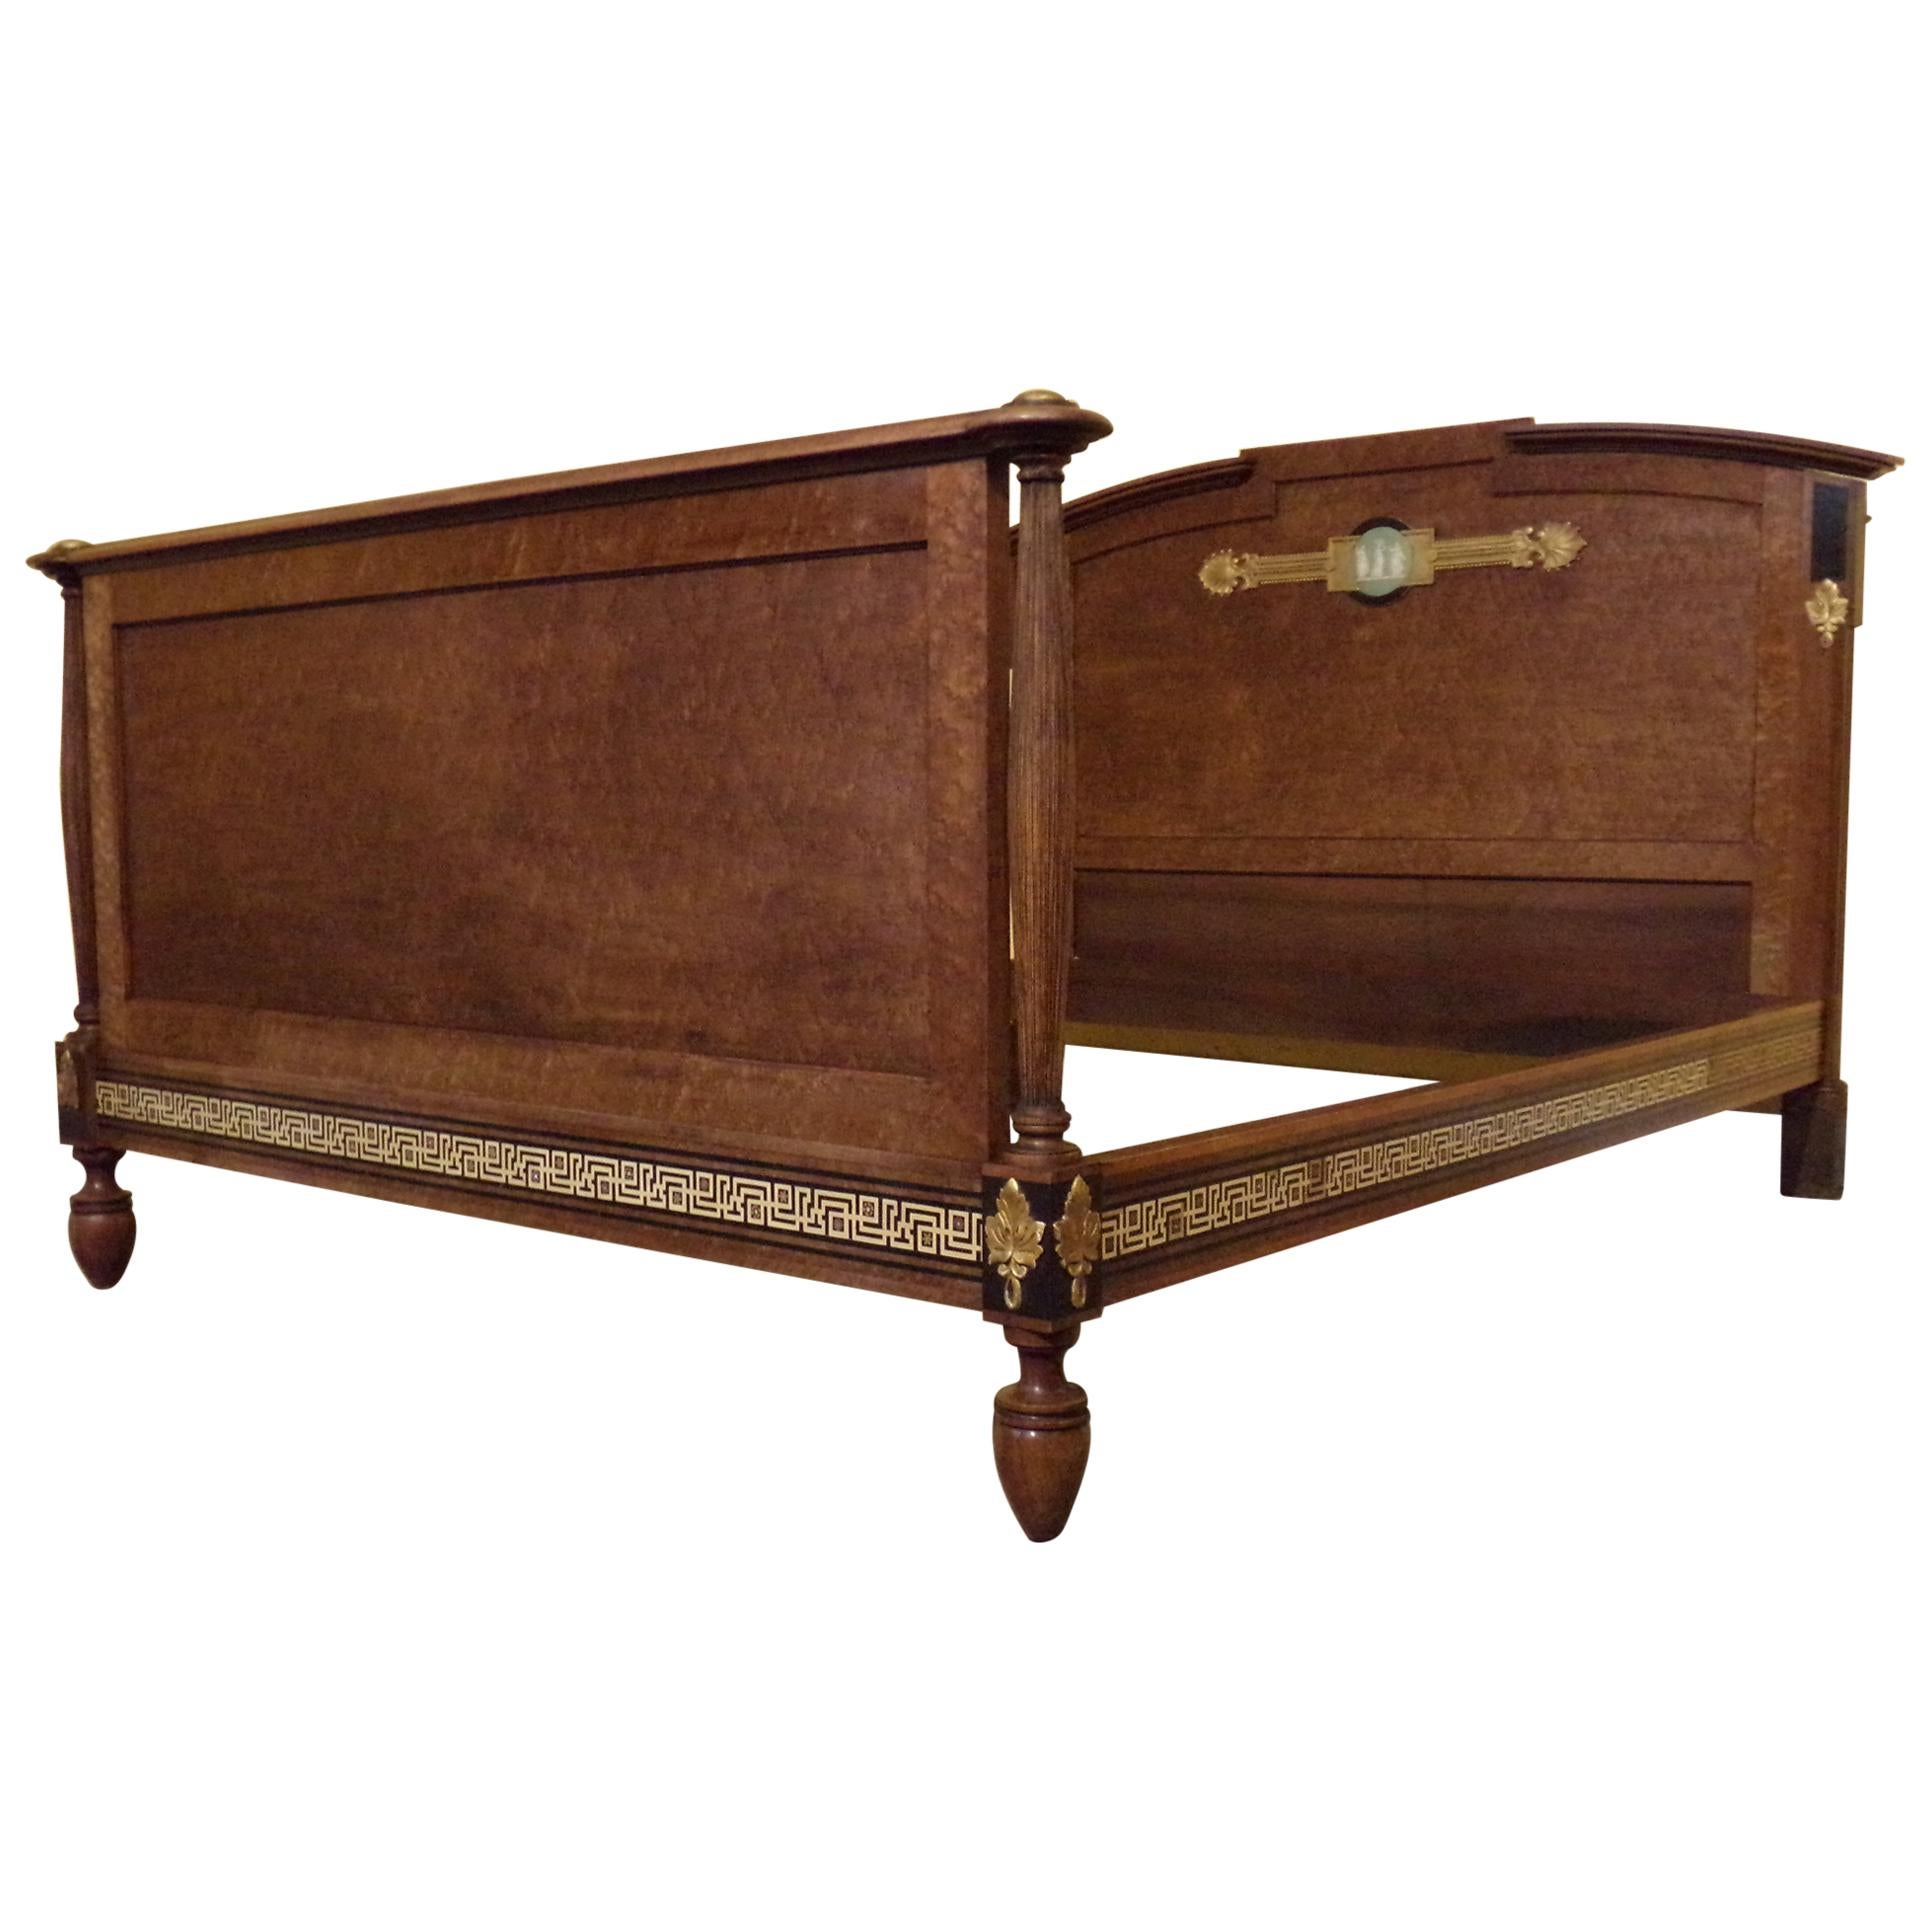 Empire Style Ormolu Mounted Bed in Bird’s-Eye Maple with Plaque For Sale